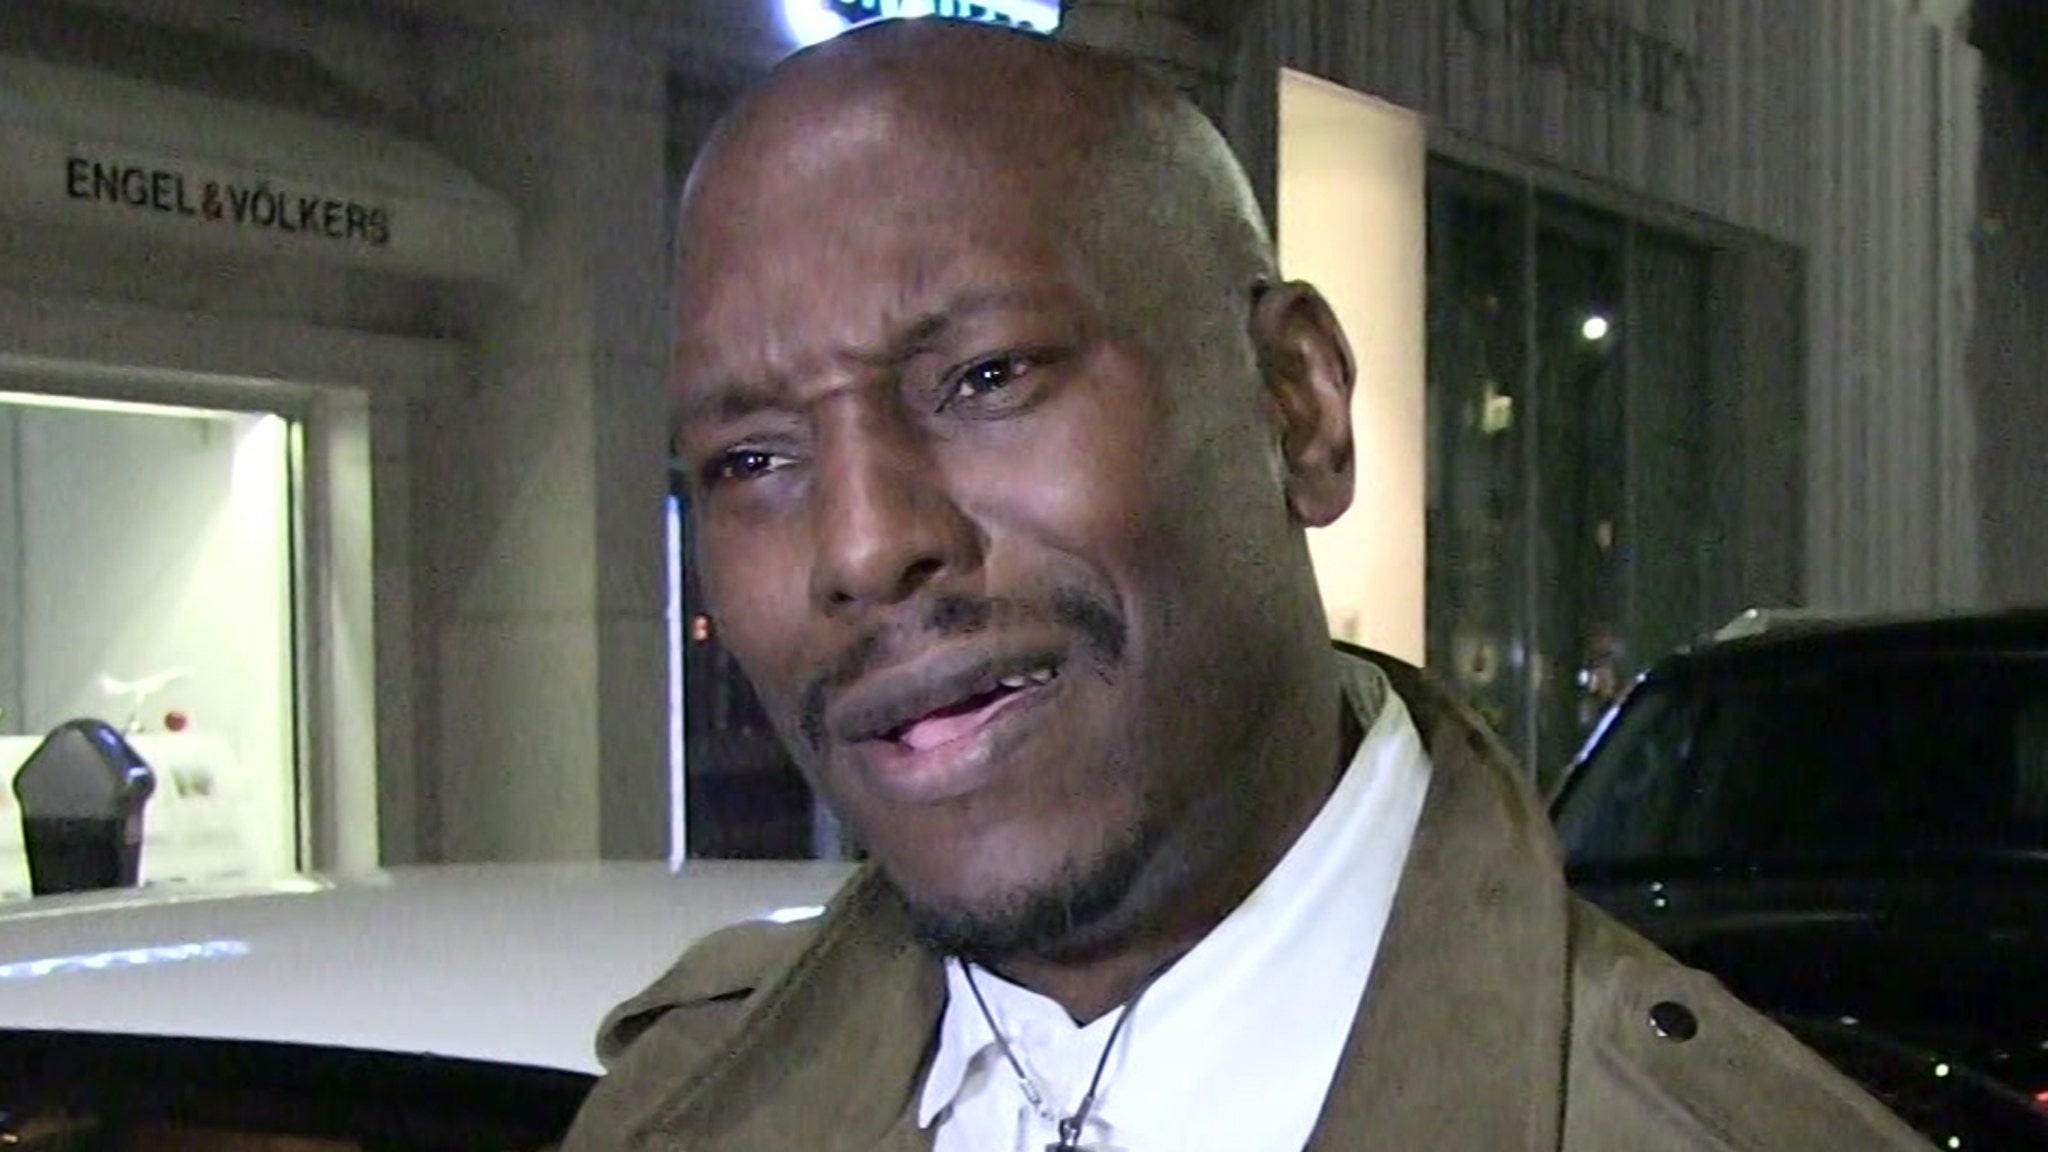 Tyrese wants new judge to handle divorce case after heated argument in court